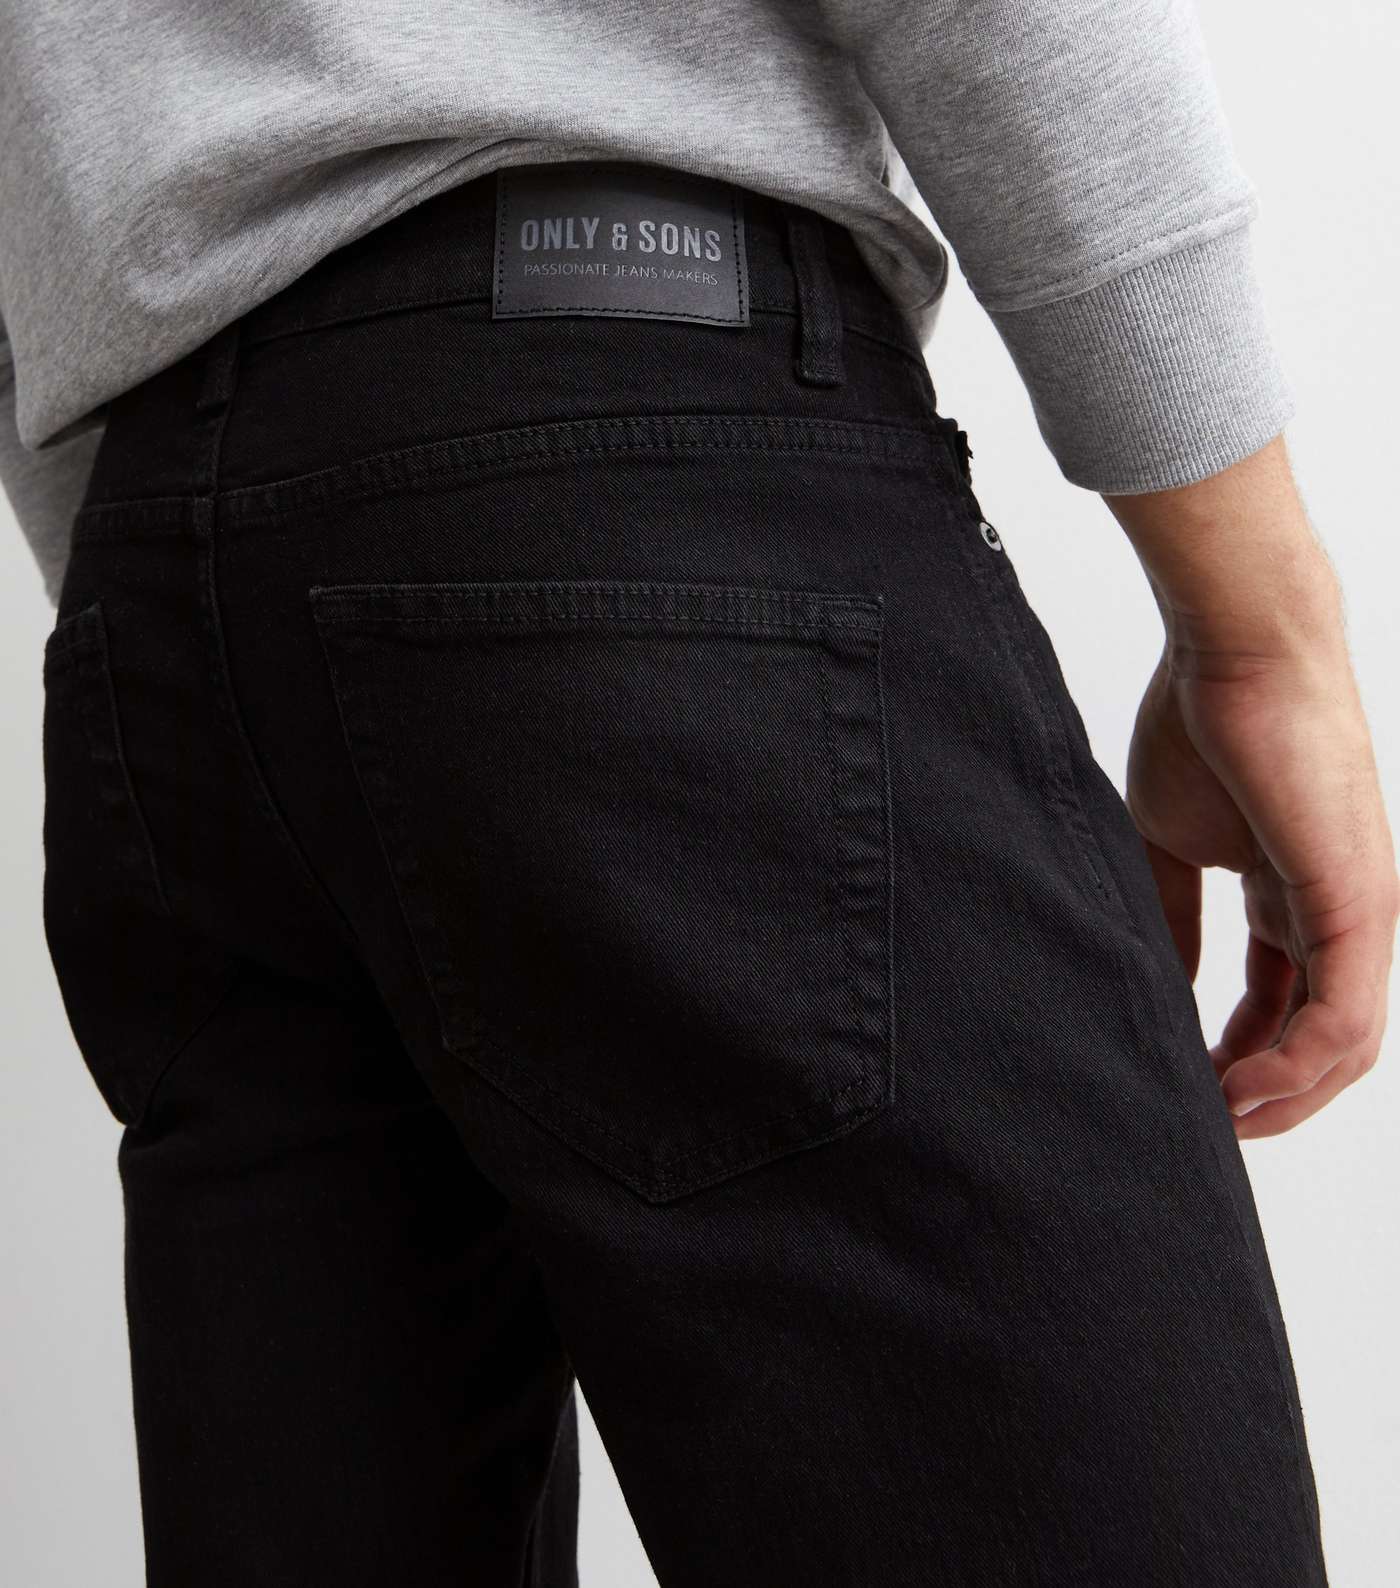 Only & Sons Black Slim Fit Jeans Image 4